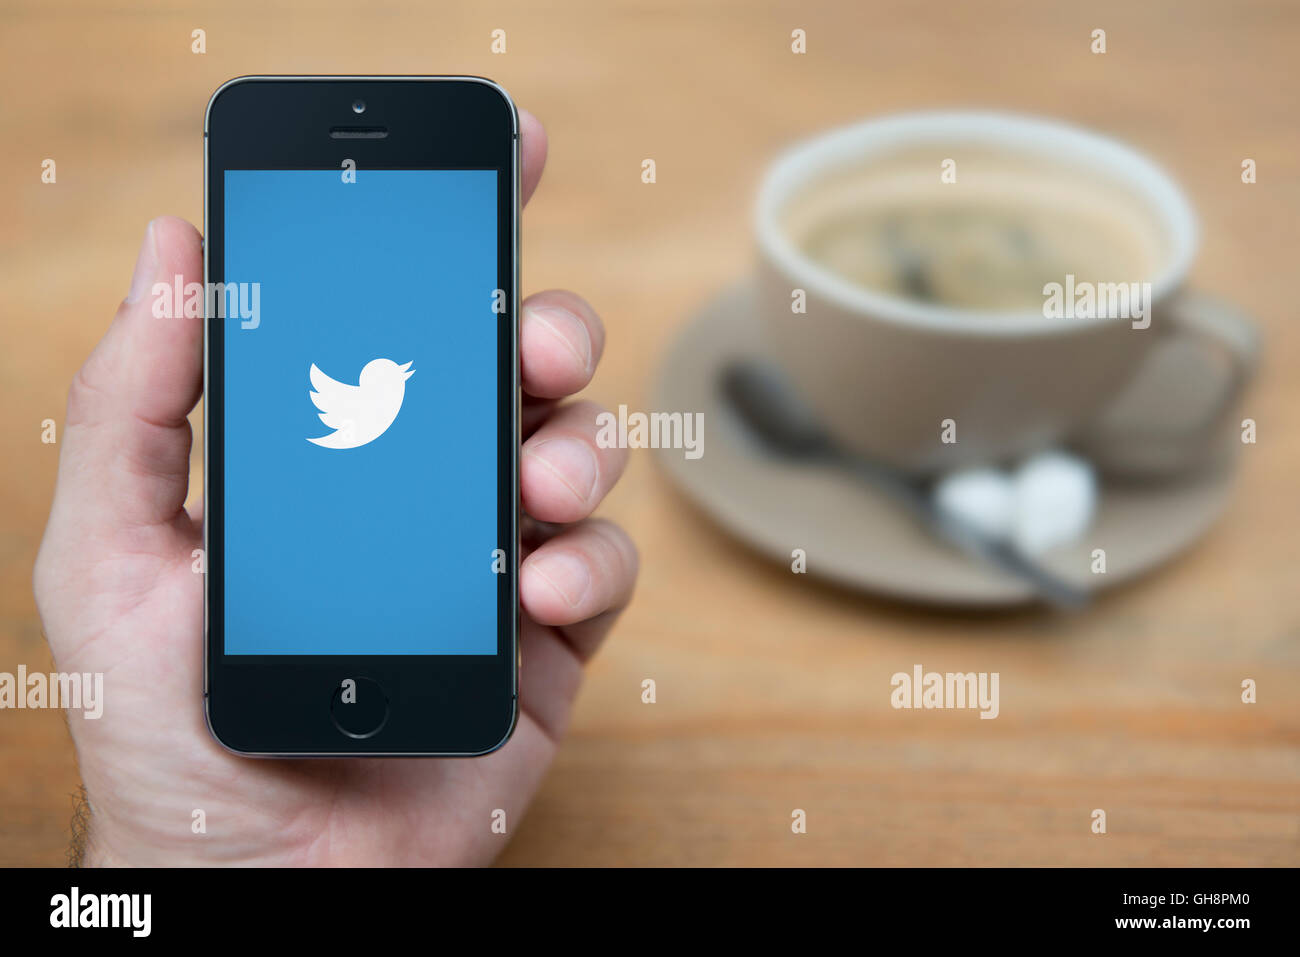 A man looks at his iPhone which displays the Twitter logo, while sat with a cup of coffee (Editorial use only). Stock Photo